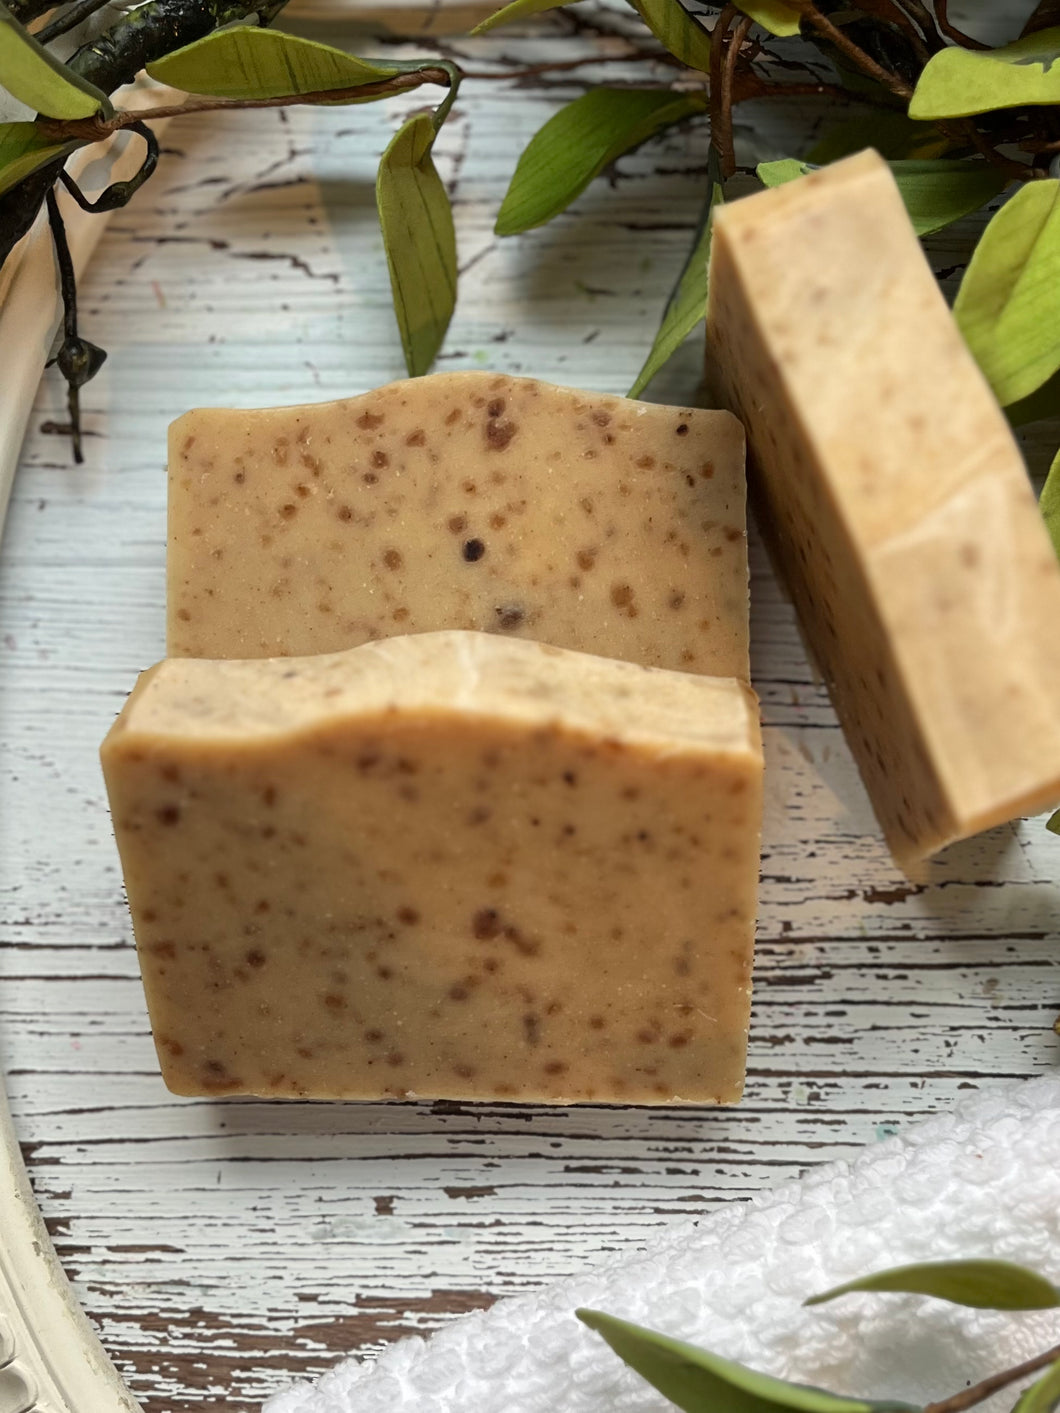 [Essential Oil] Turmeric, Rosemary, and Black African Soap